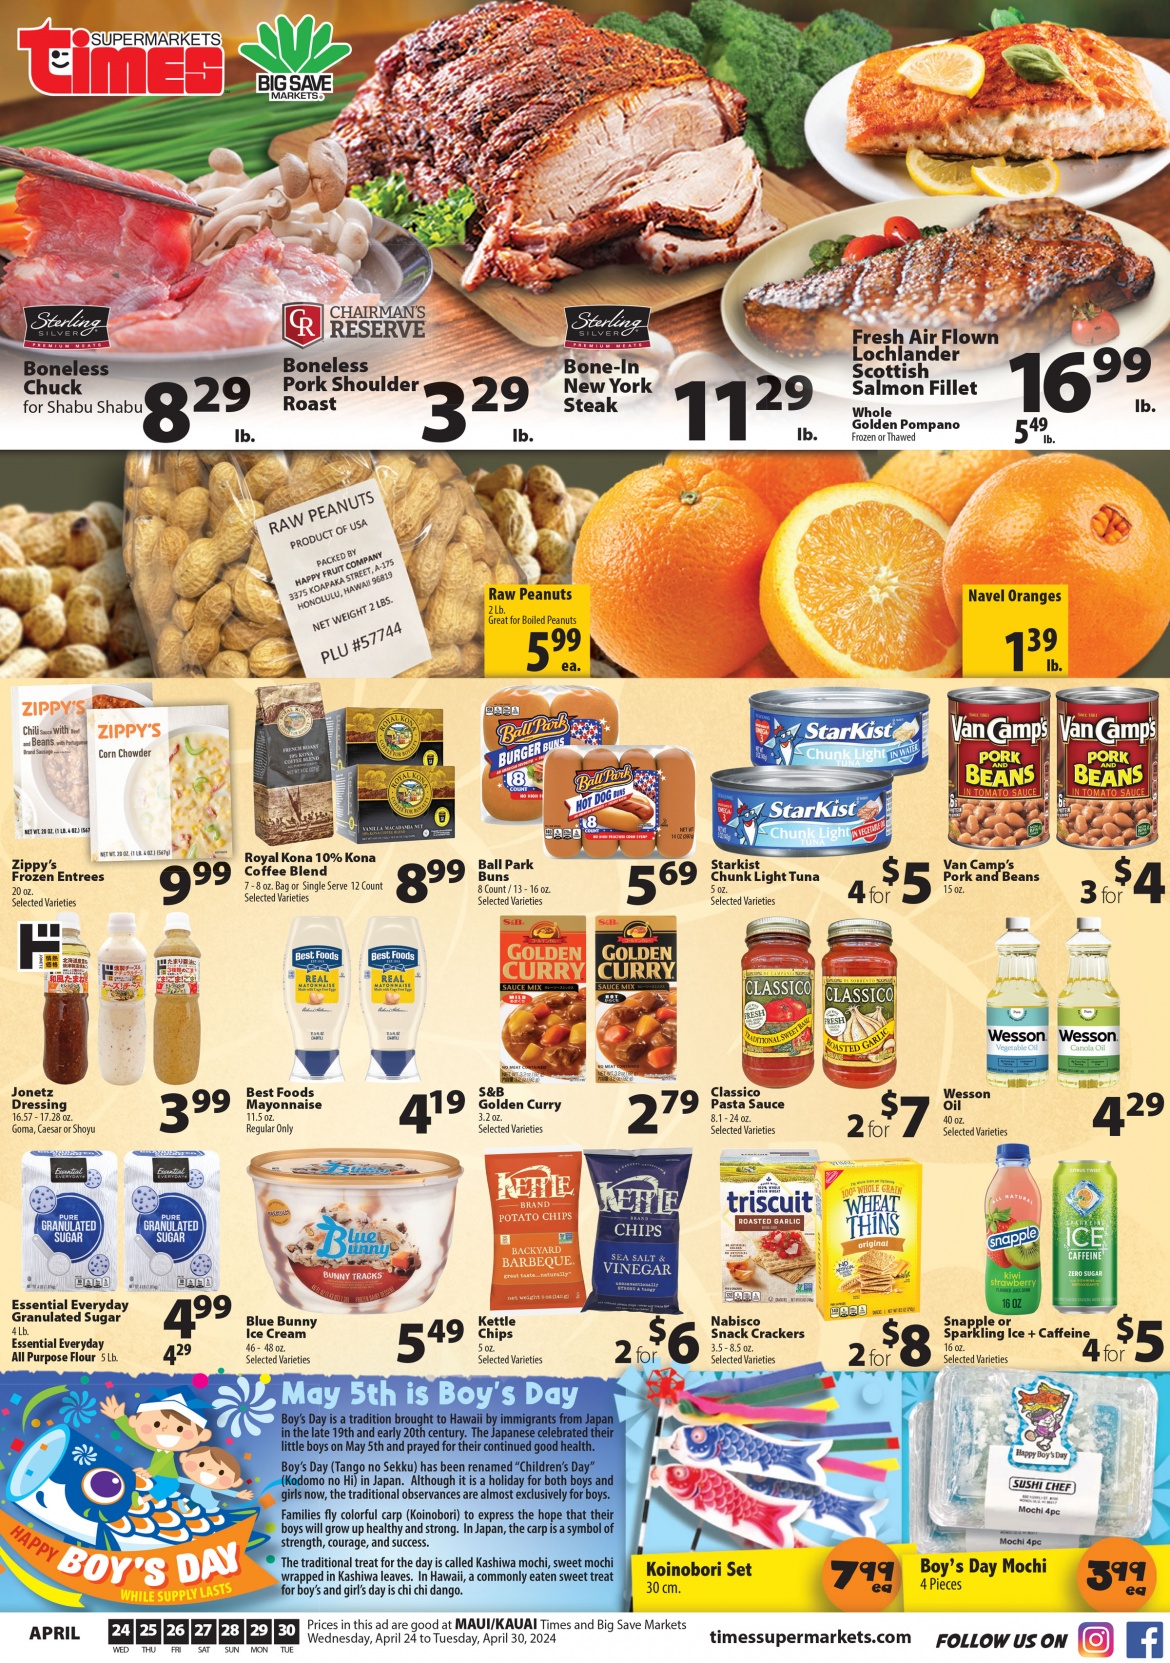 TimesSupermarkets_weekly_ad_042424_01